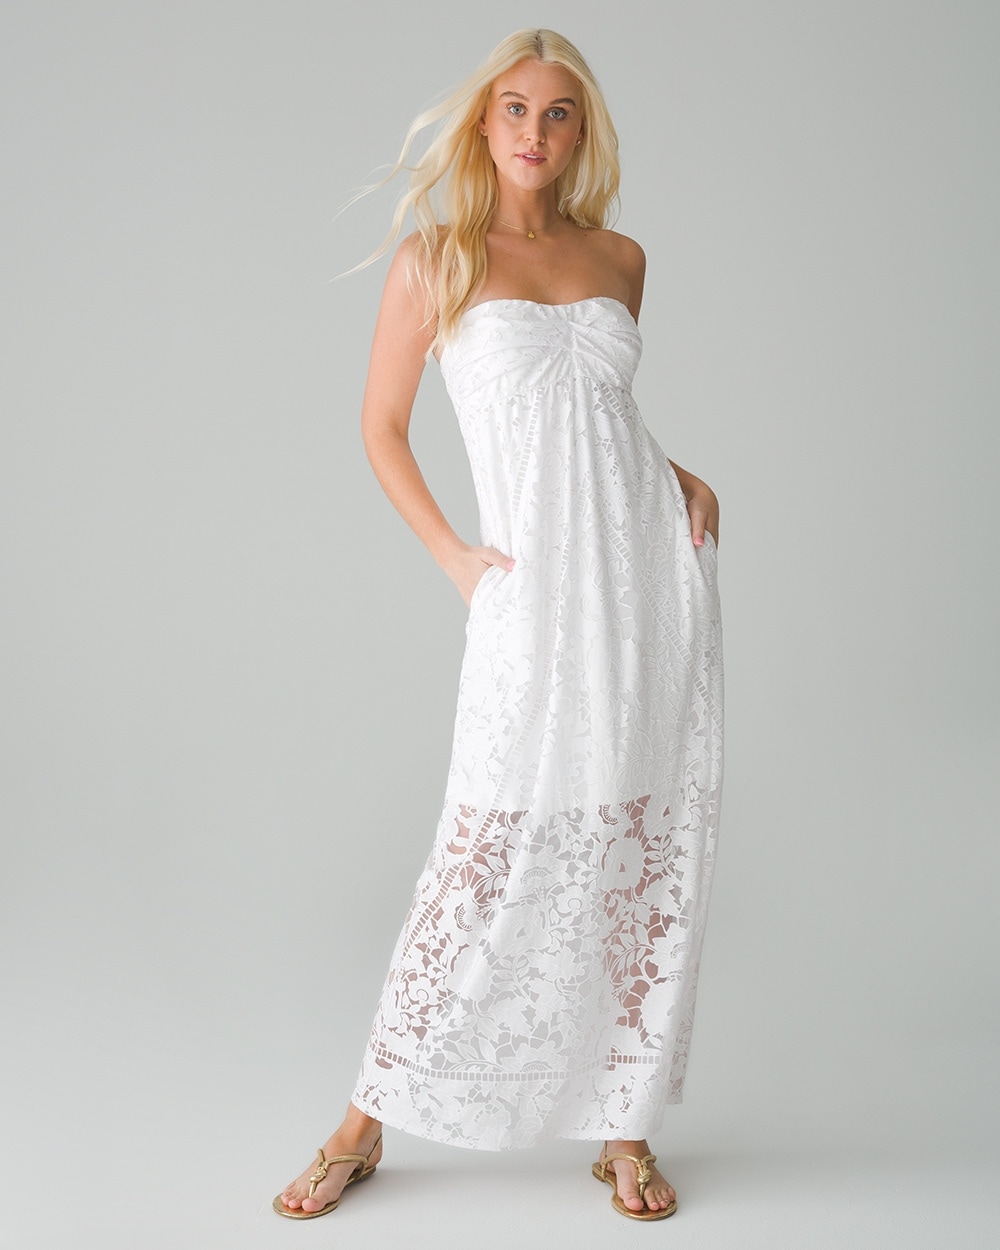 Strapless Maxi Dress With Medium Support - Soma